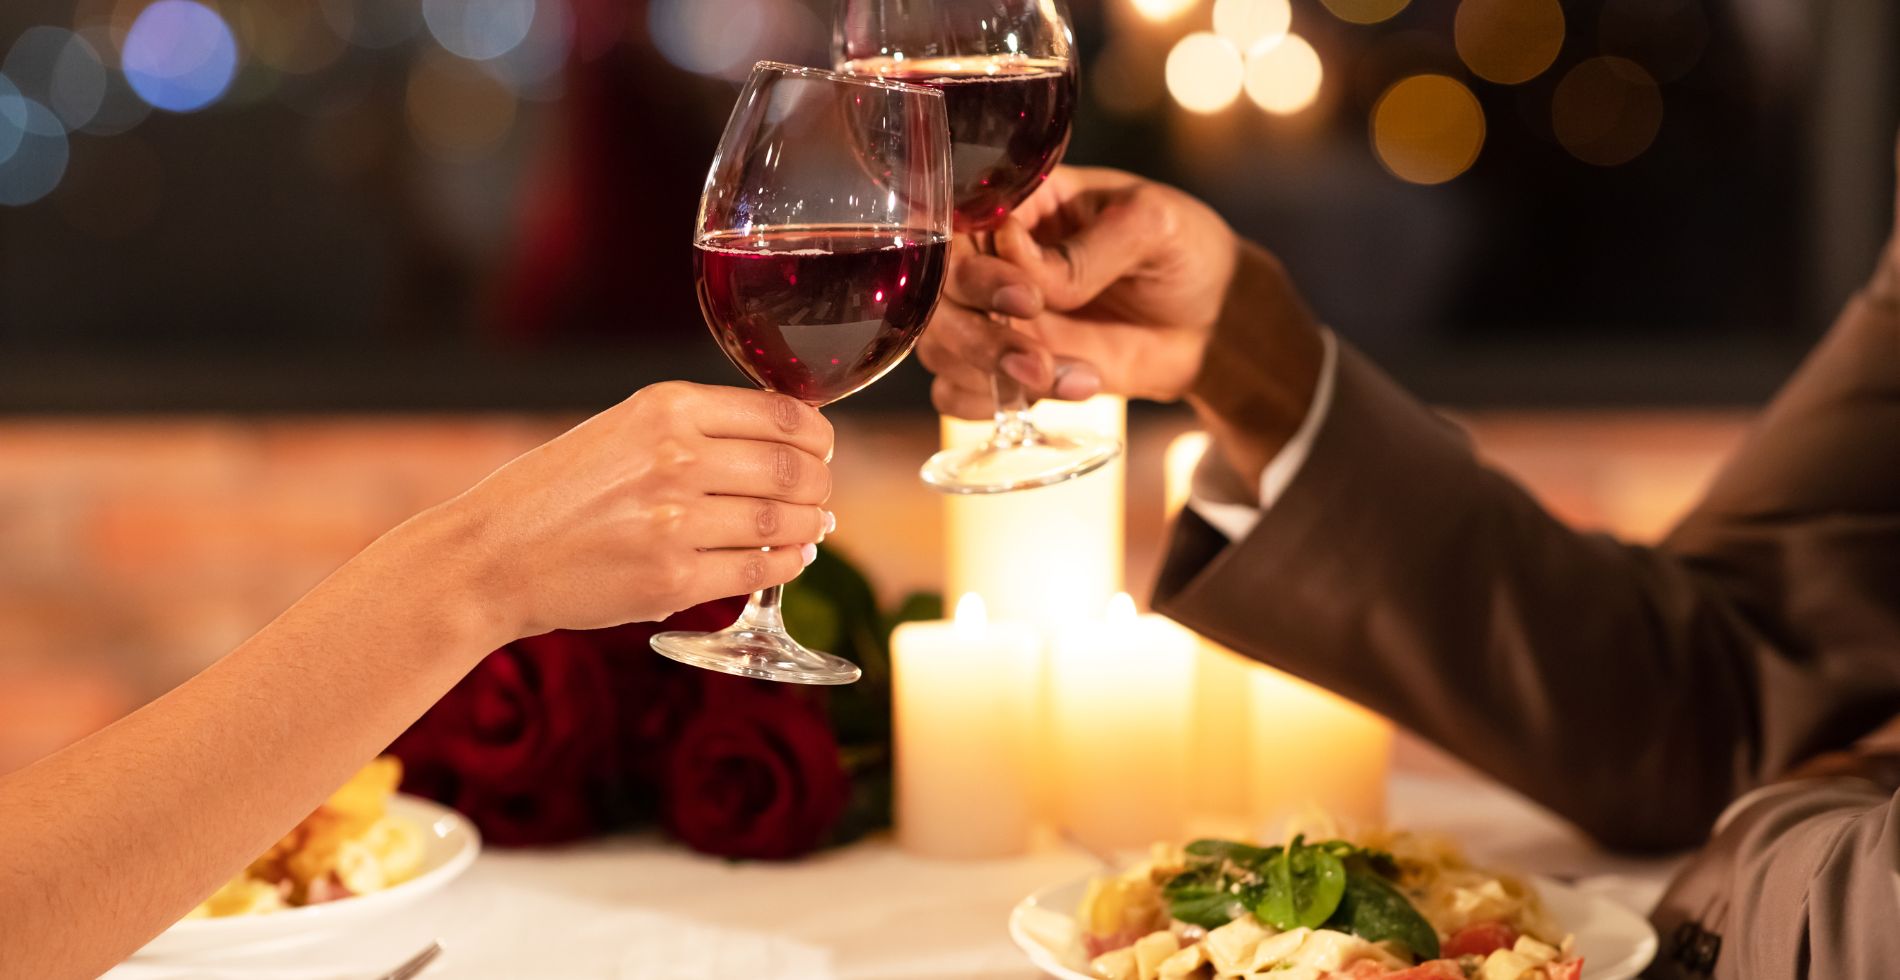 A couple clinking wine glasses while having dinner at a restaurant